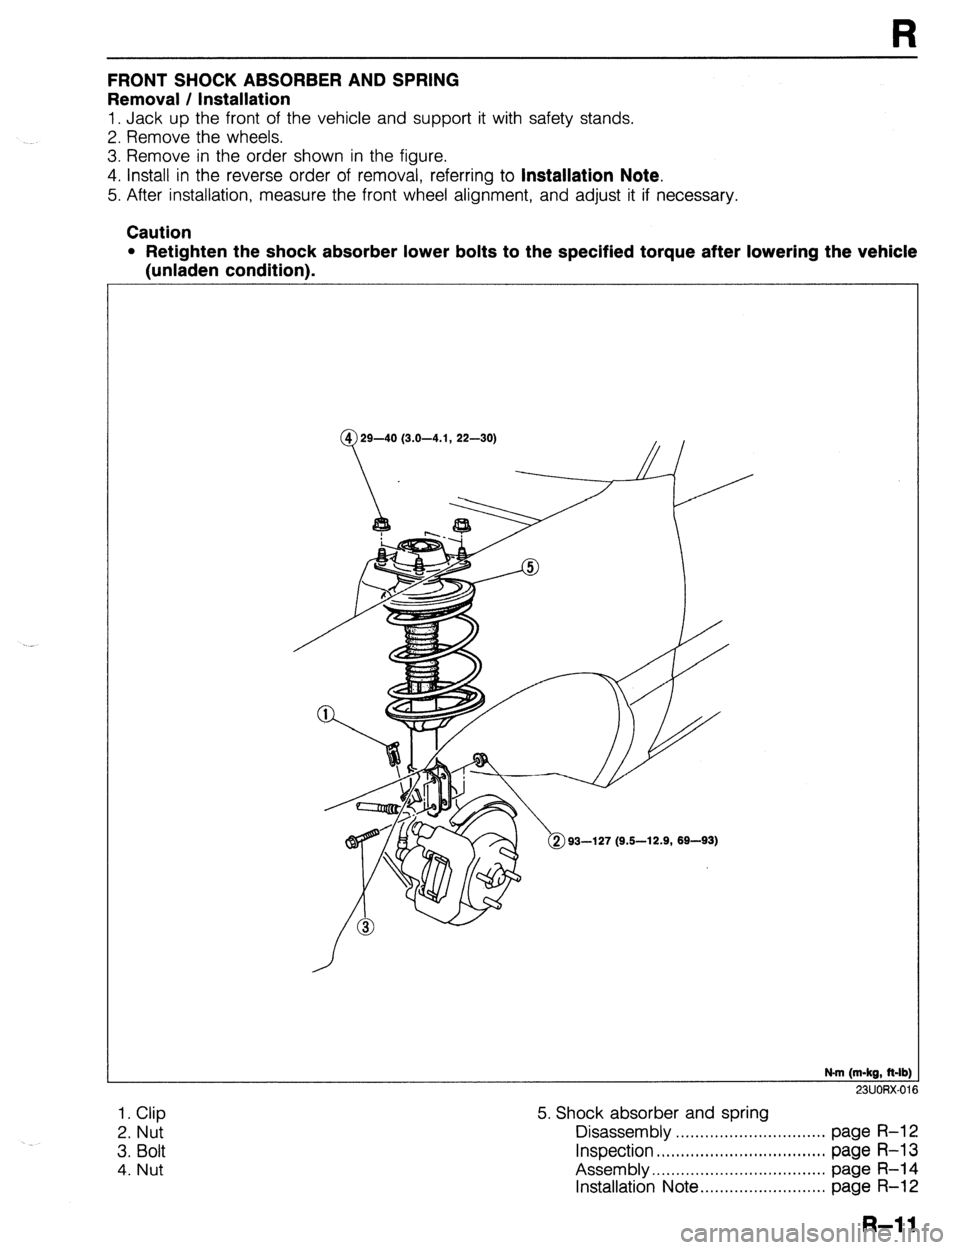 MAZDA 323 1989  Factory Repair Manual R 
FRONTSHOCKABSORBERANDSPRING 
Removal / Installation 
1. Jack up the front of the vehicle and support it with safety stands. 
2. Remove the wheels. 
3. Remove in the order shown in the figure. 
4. I